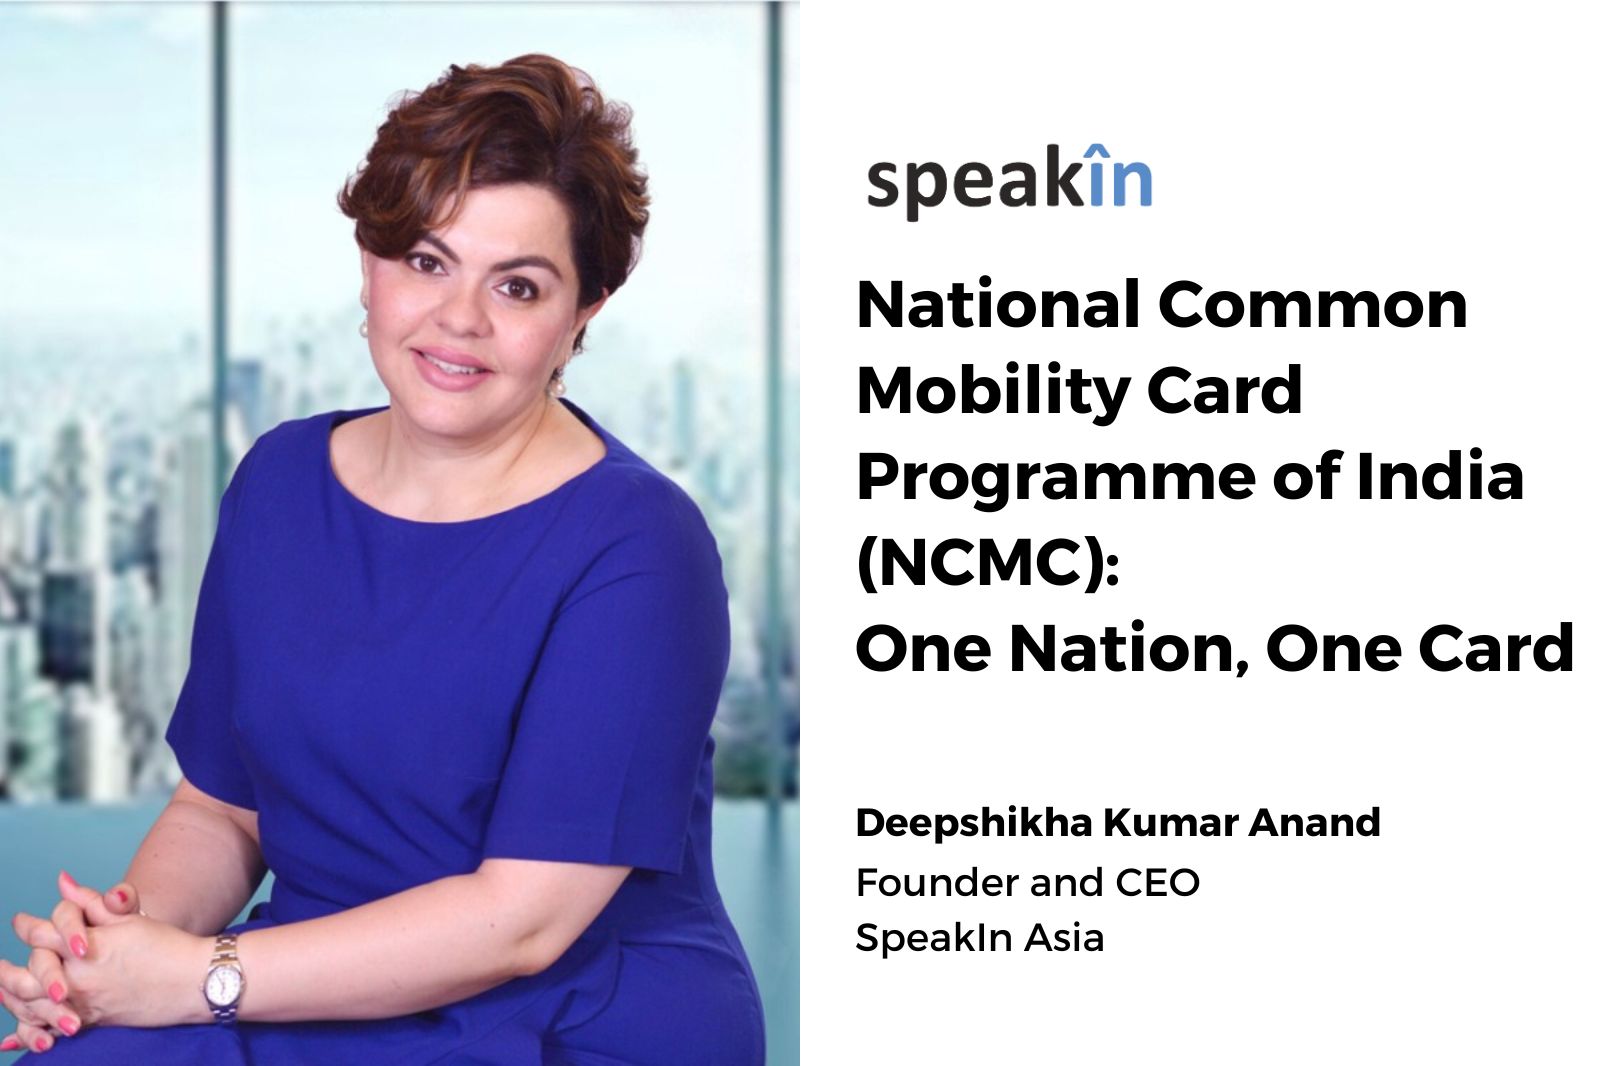 National Common Mobility Card Programme of India (NCMC): One Nation, One Card